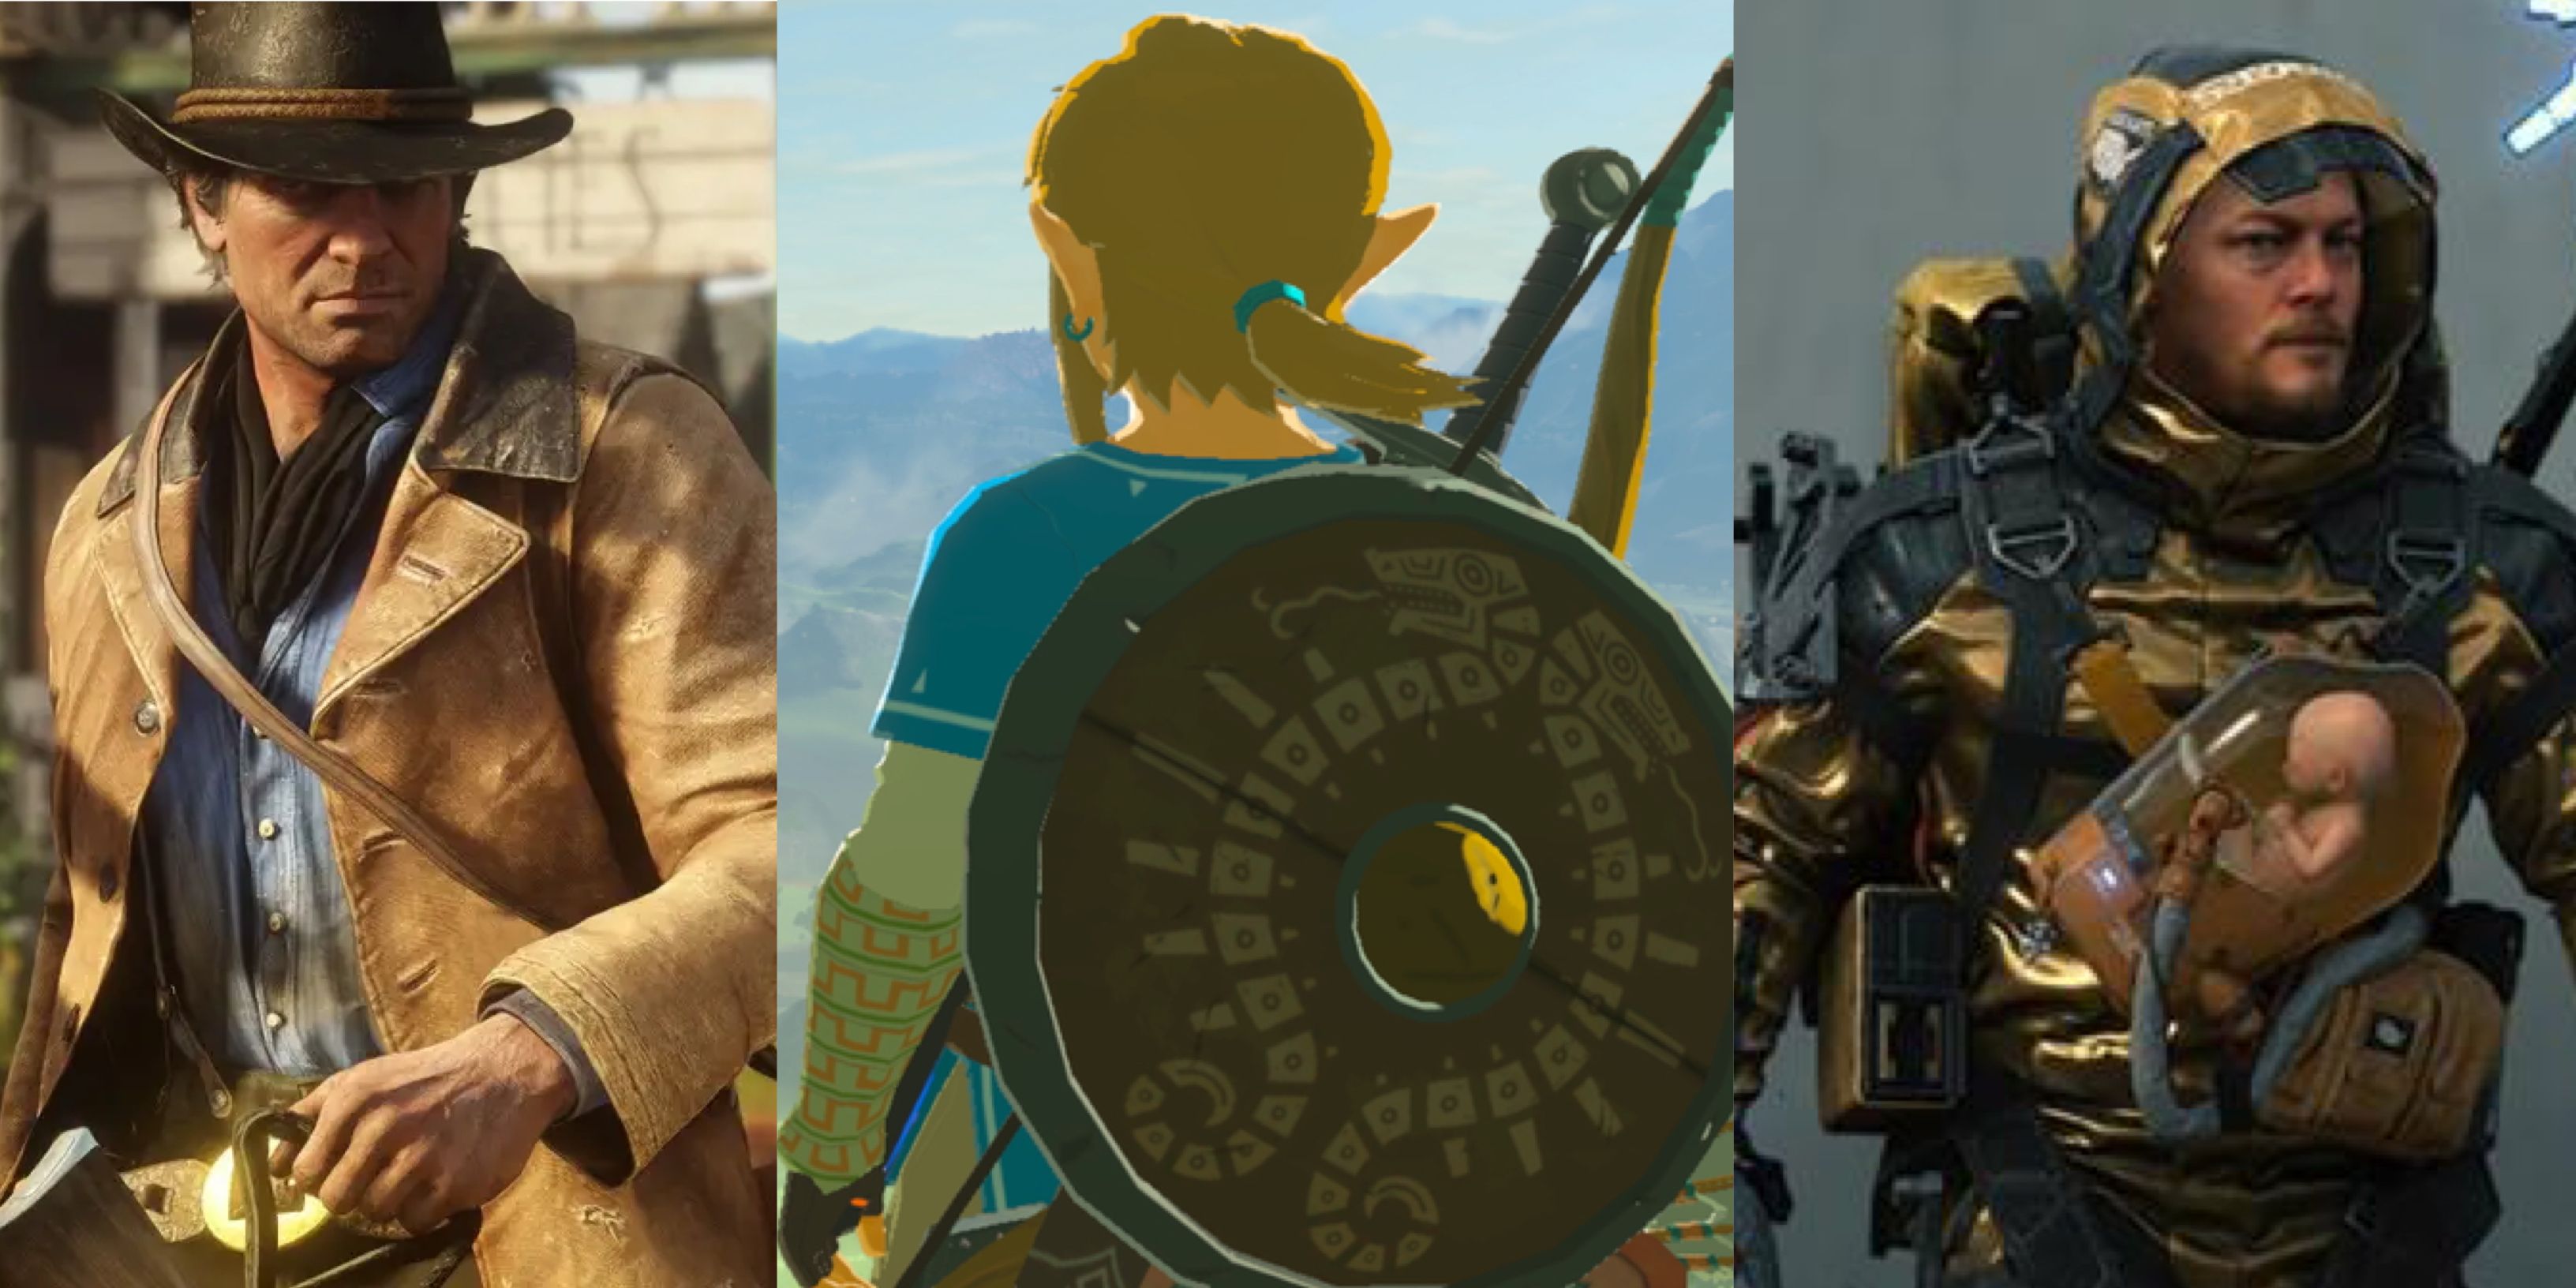 Open-World Games That You Feel Small: Red Dead Rdemption 2 (left), The Legend of Zelda (middle), and Death Stranding (right)